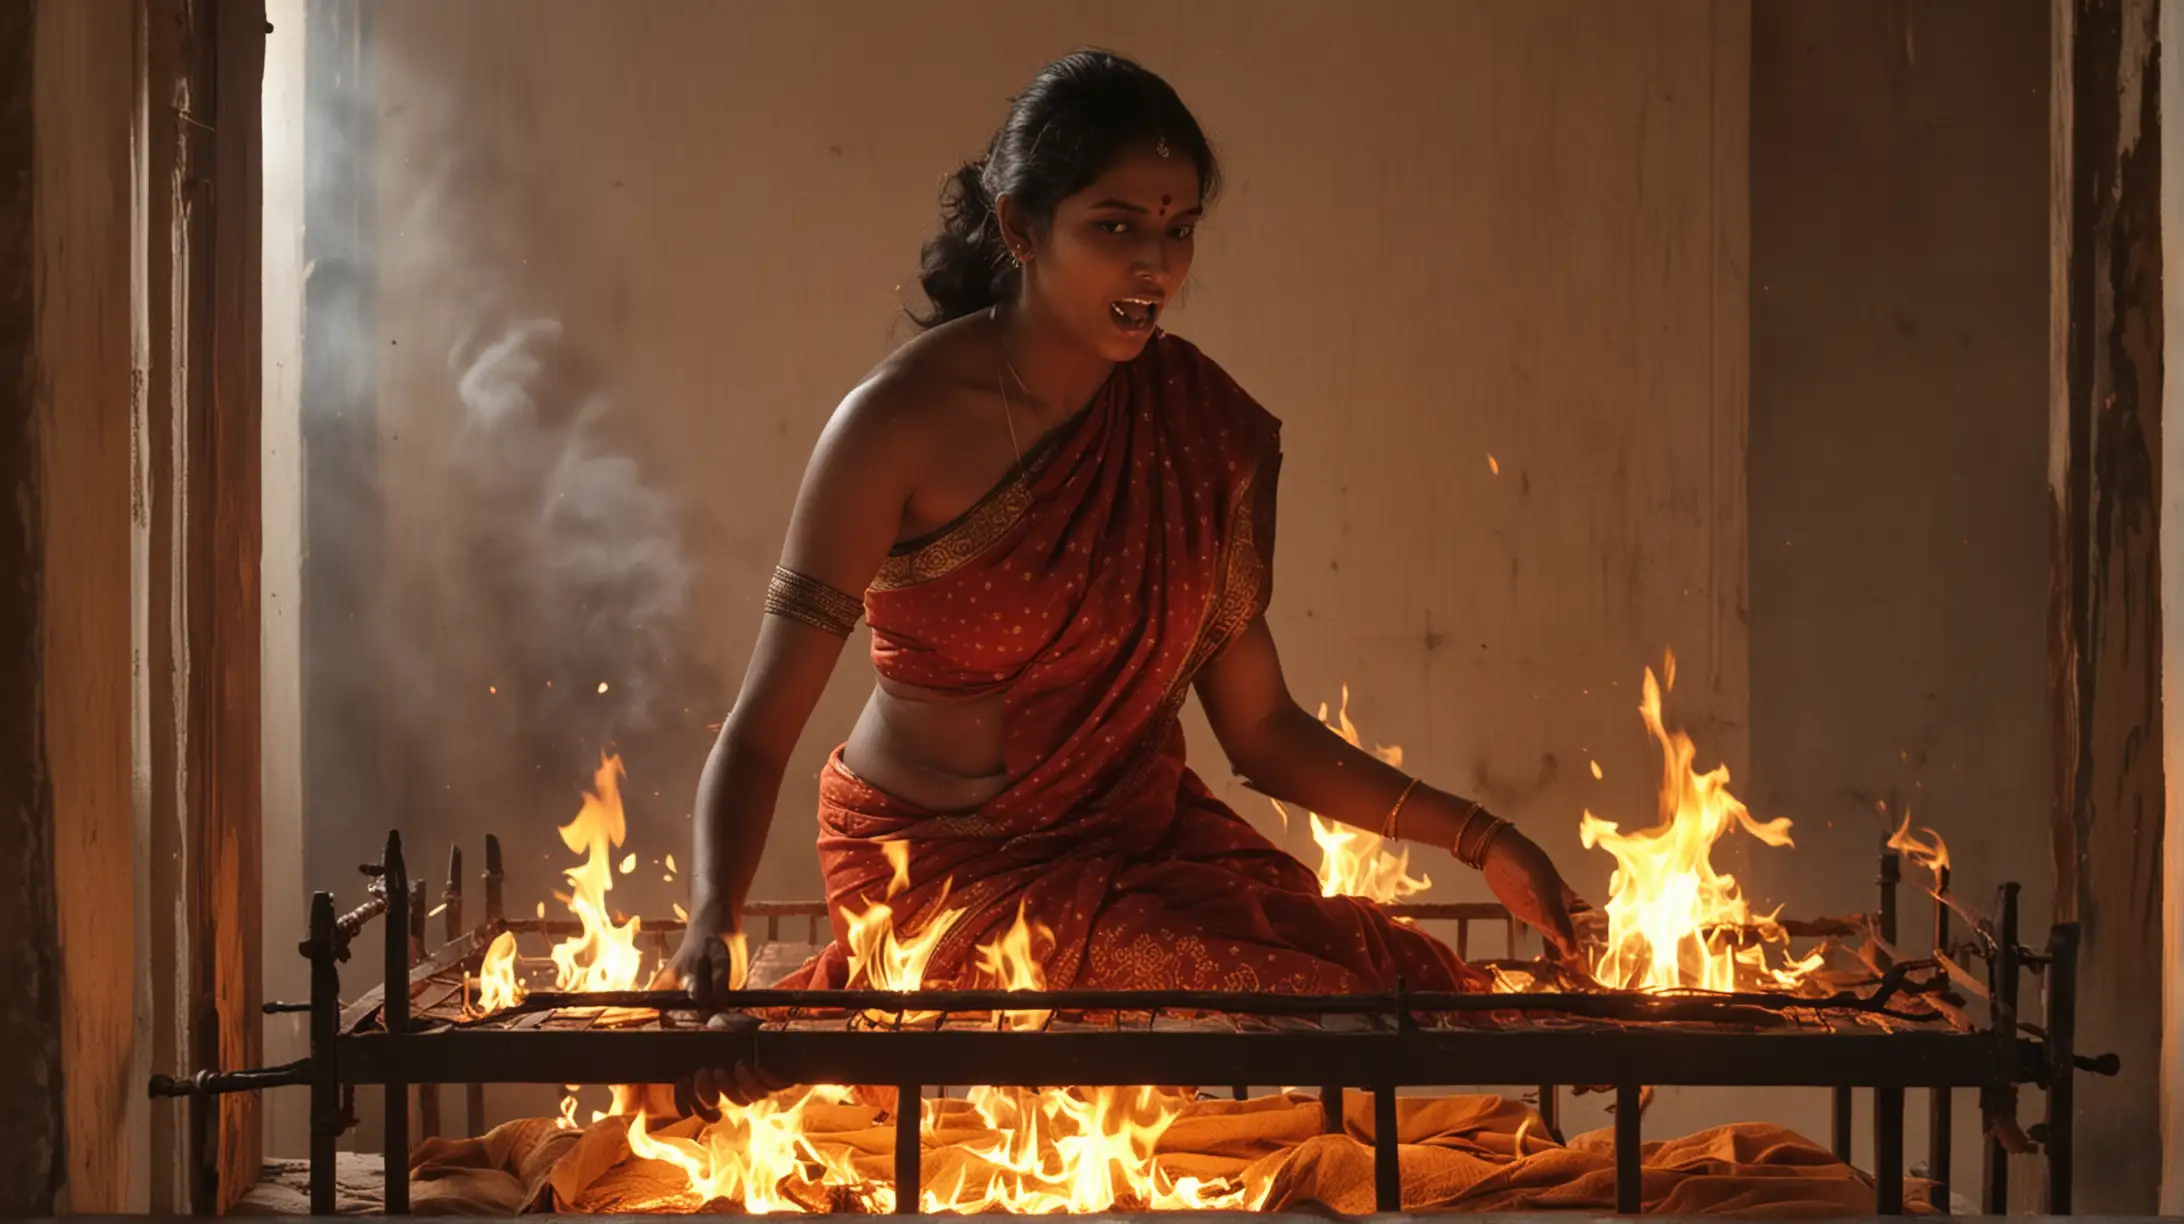 south Indian woman burning in flames in a temple room on a cot